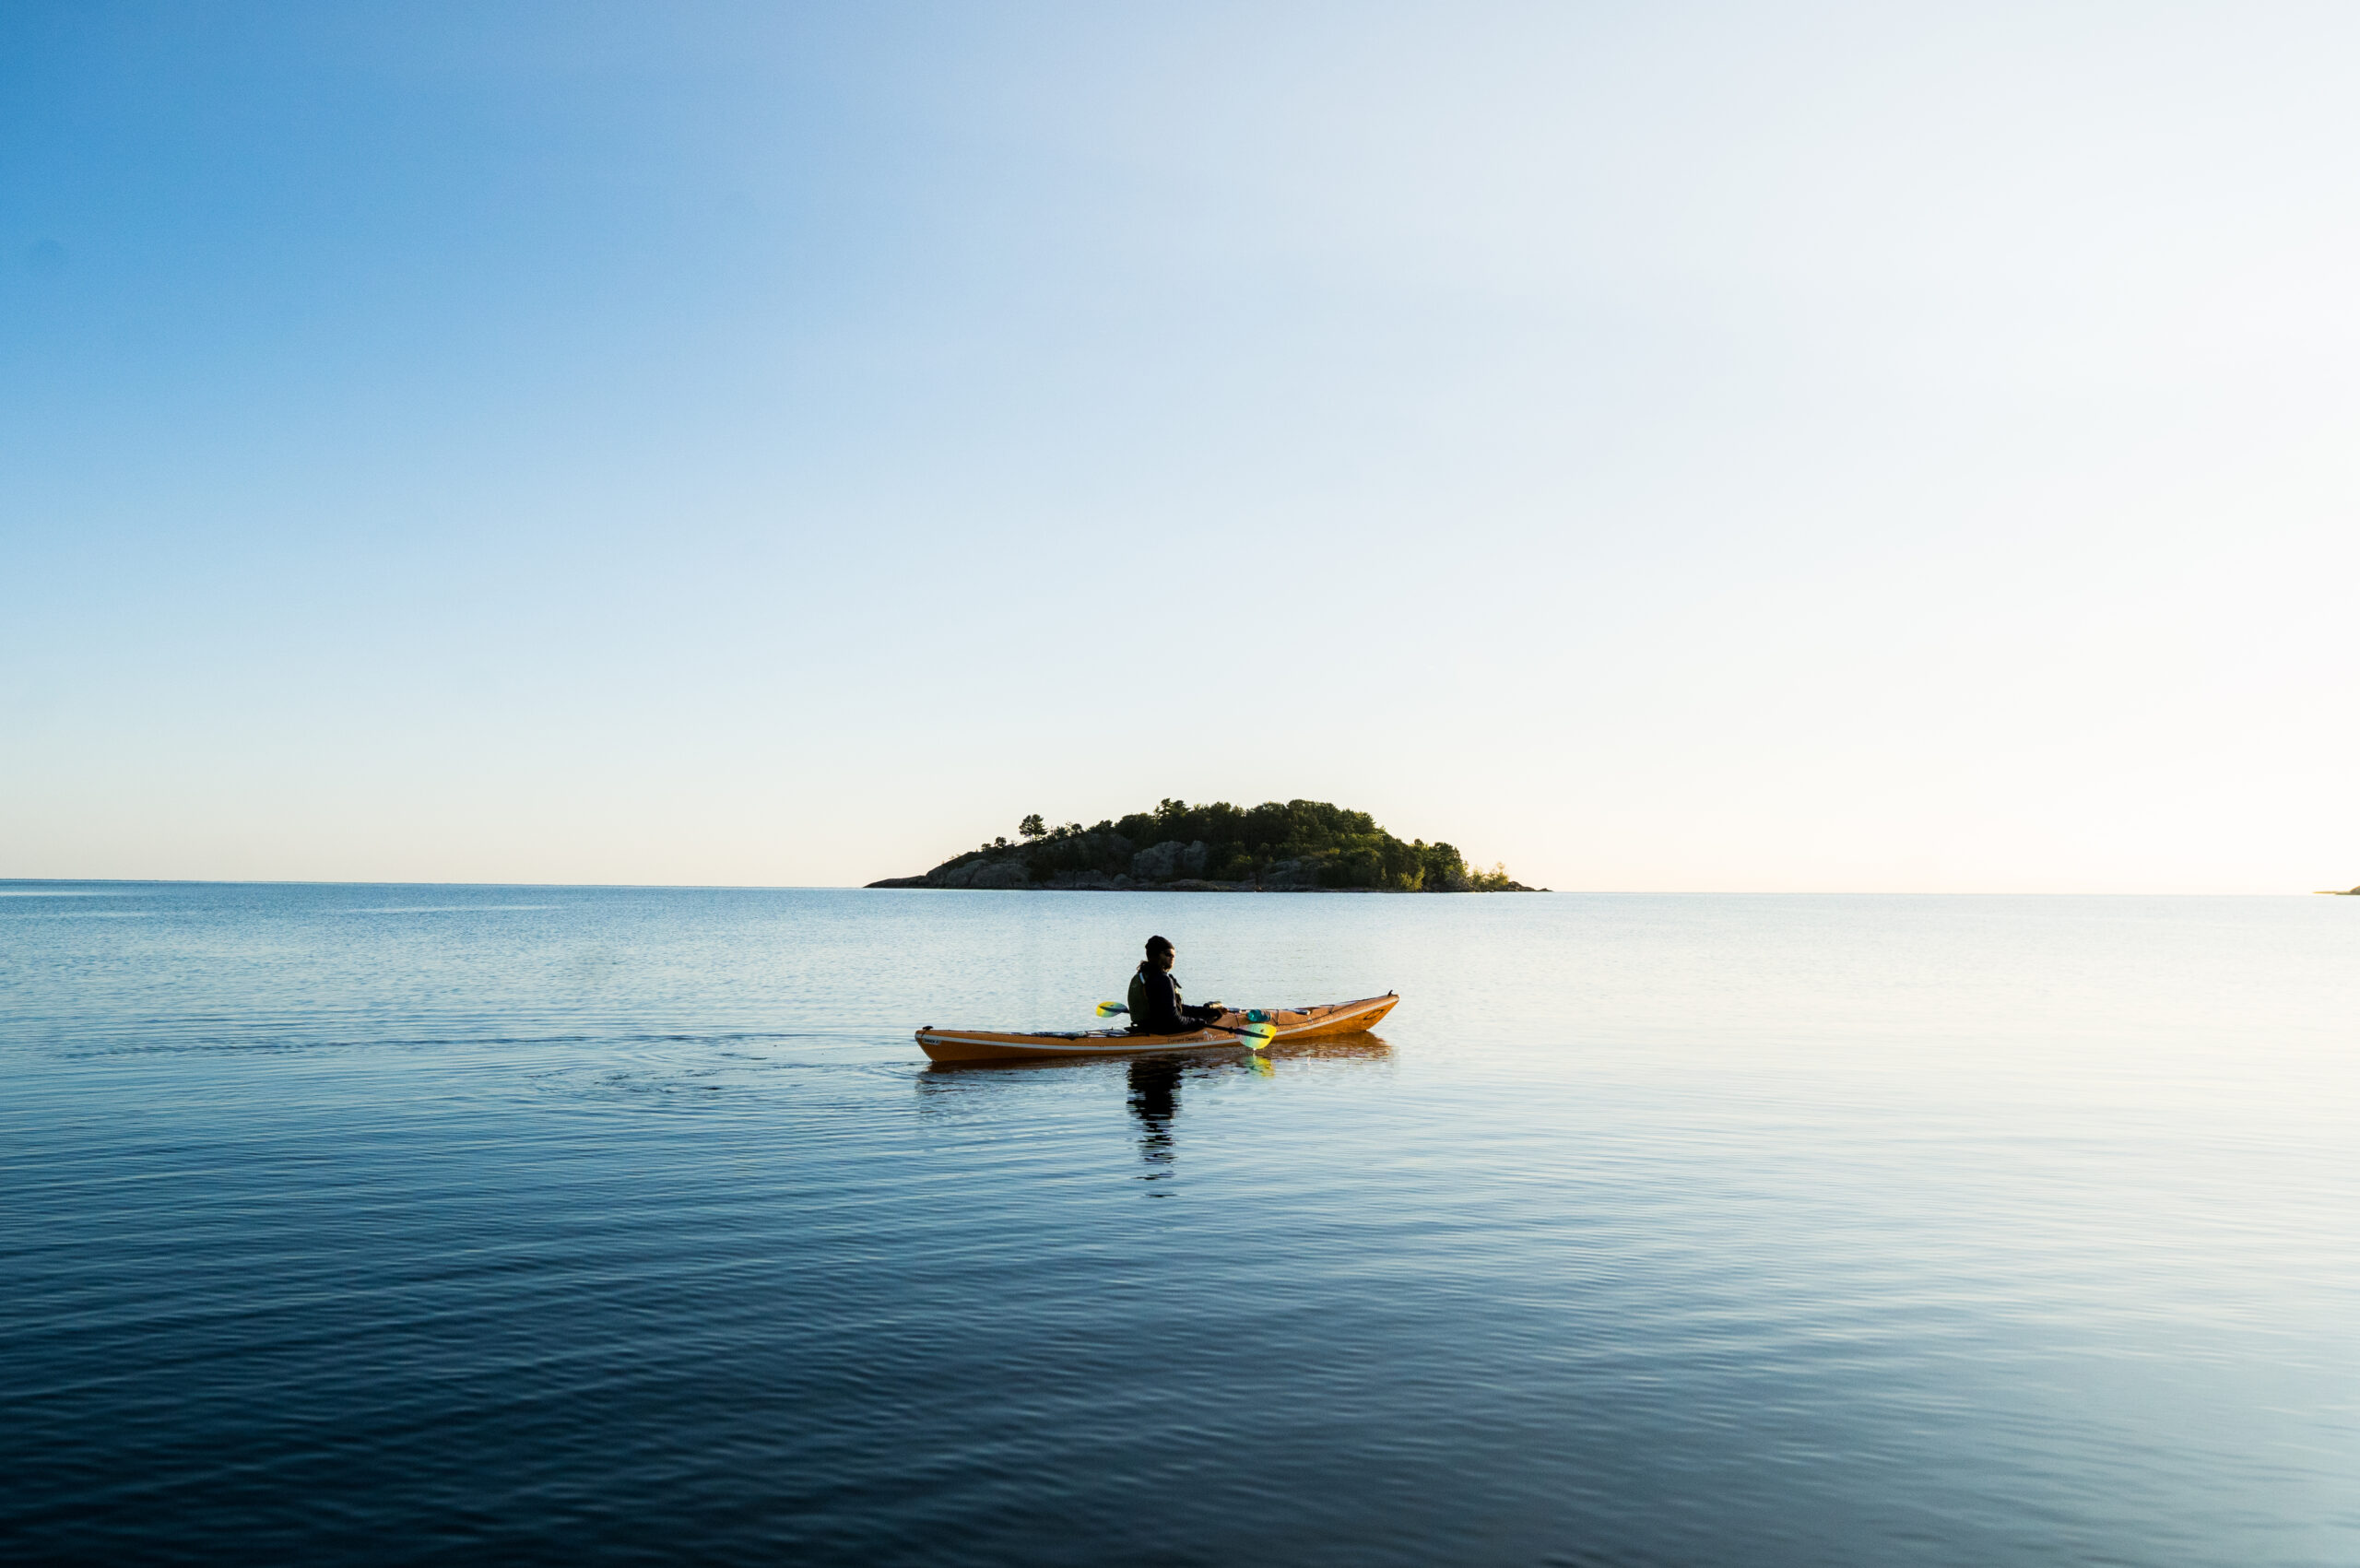 Kayaking in Marquette, Michigan